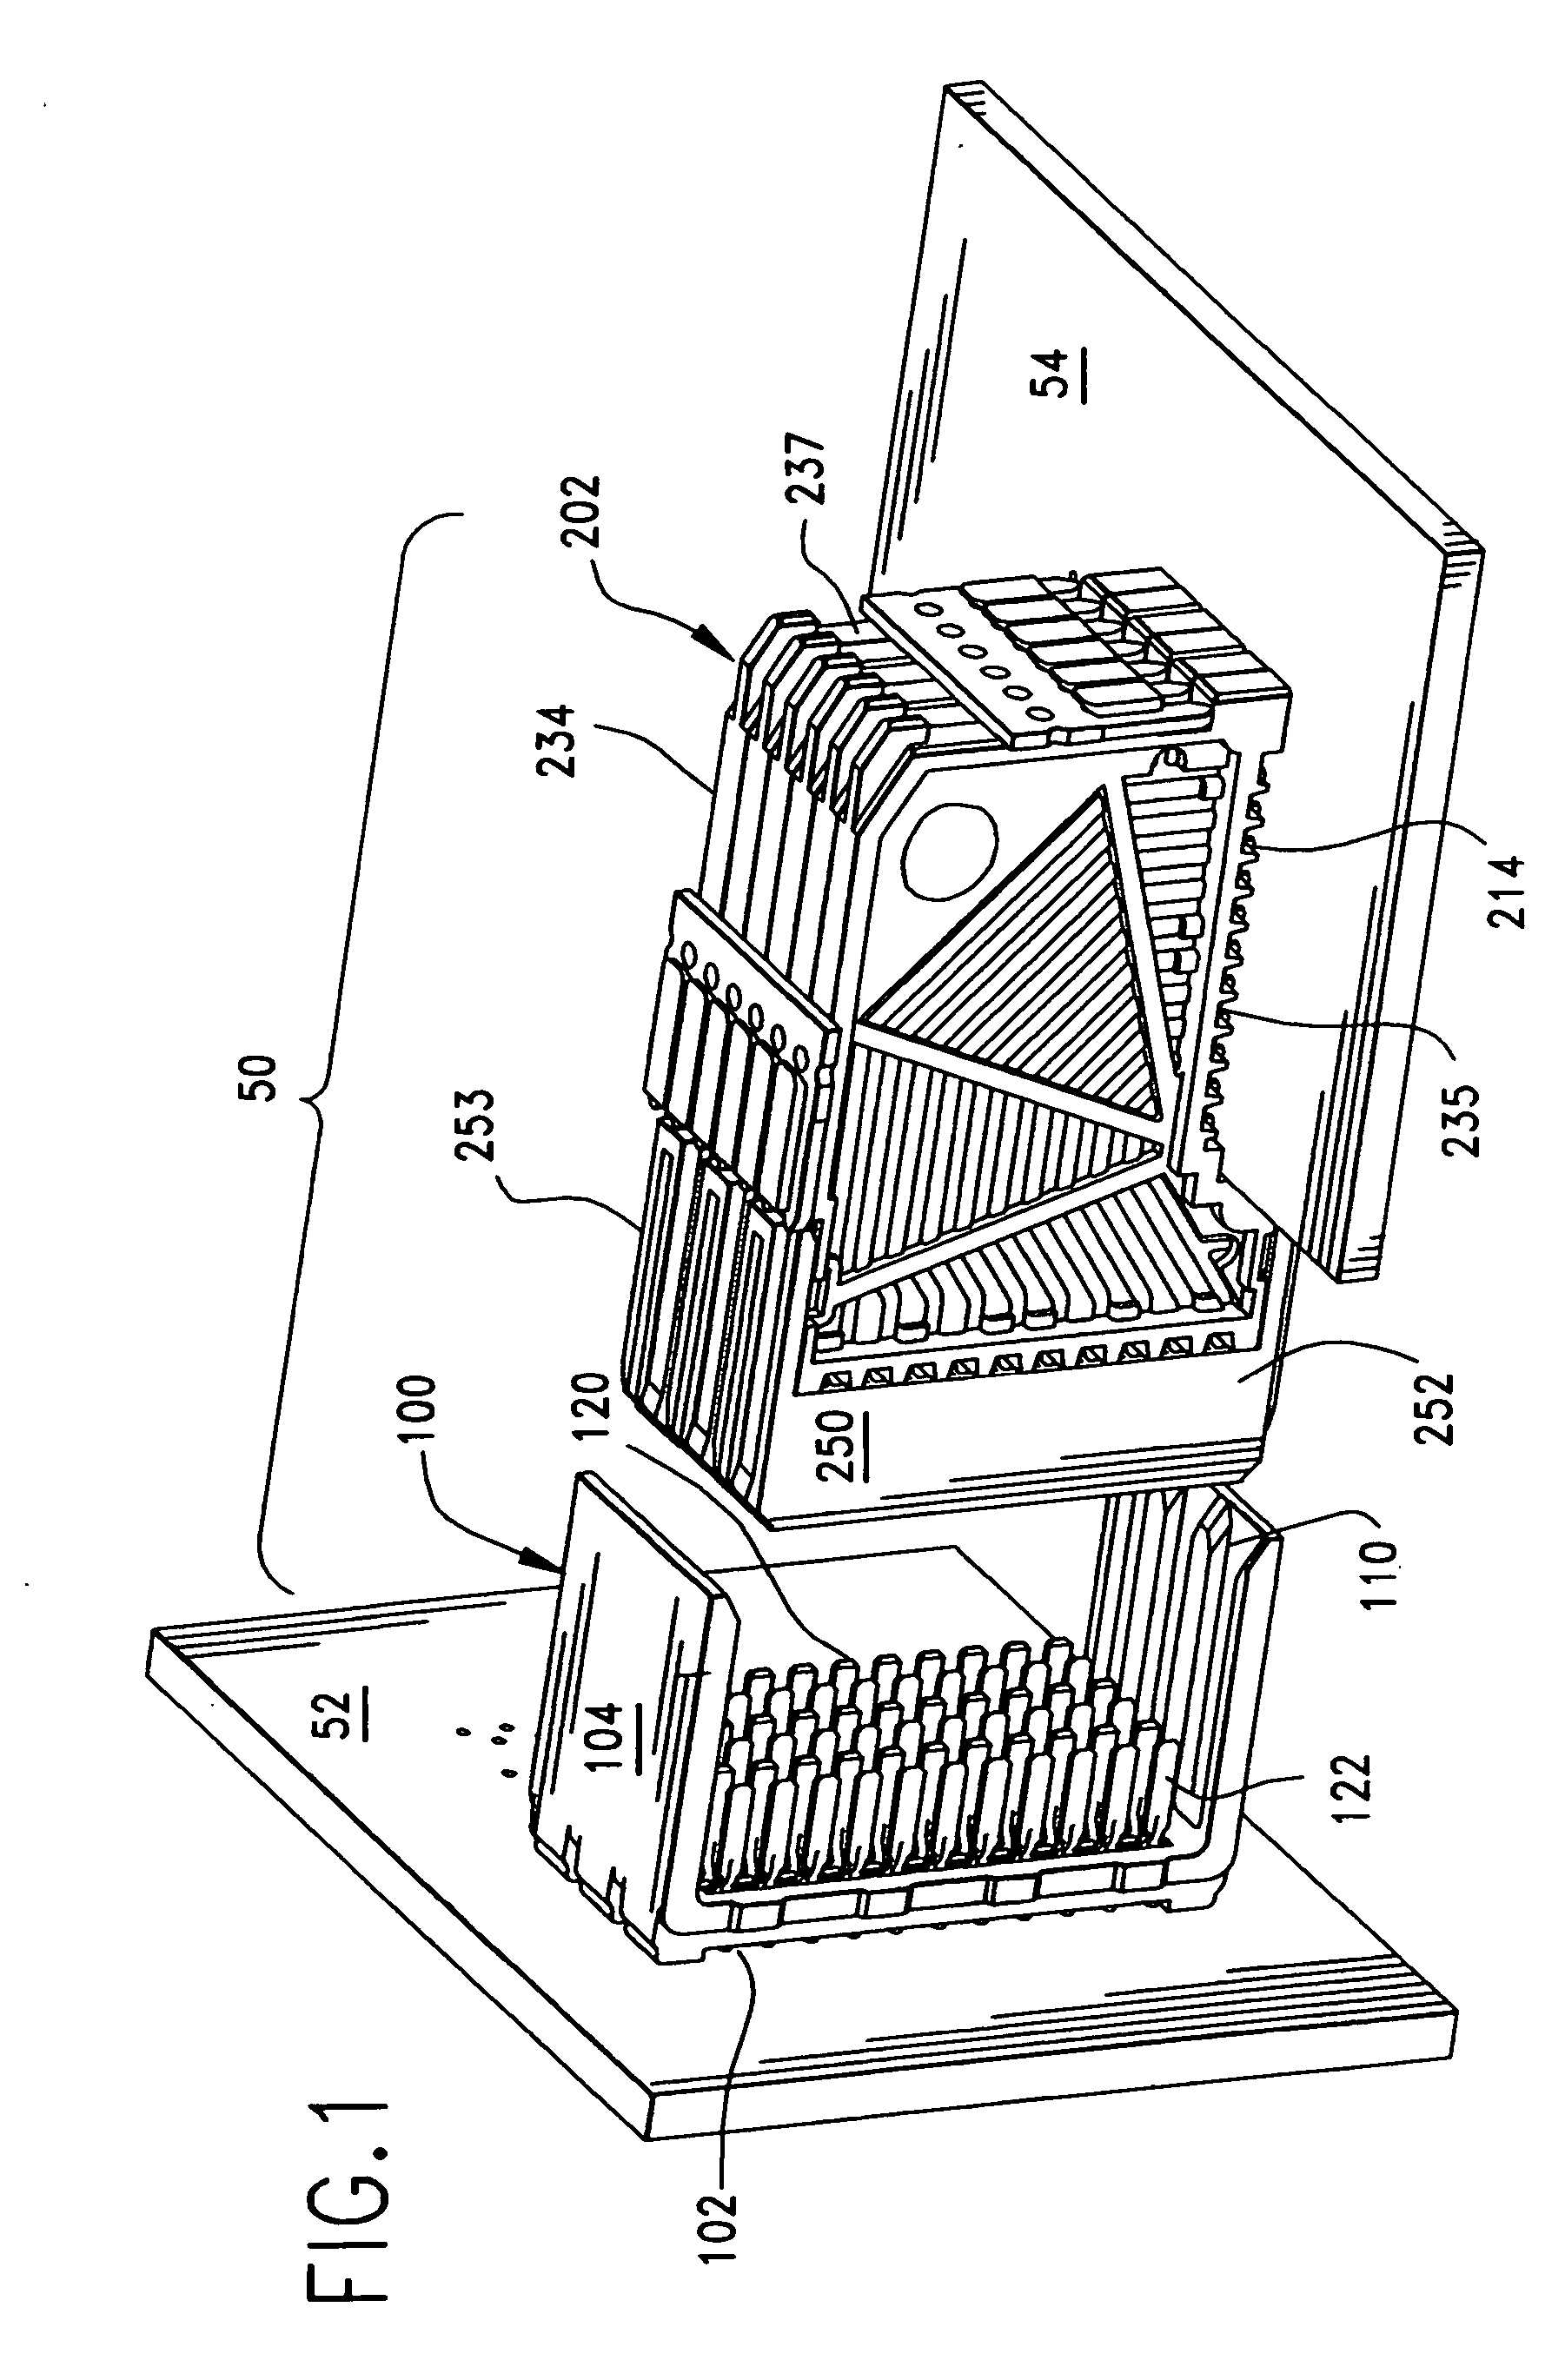 High-density, robust connector for stacking applications